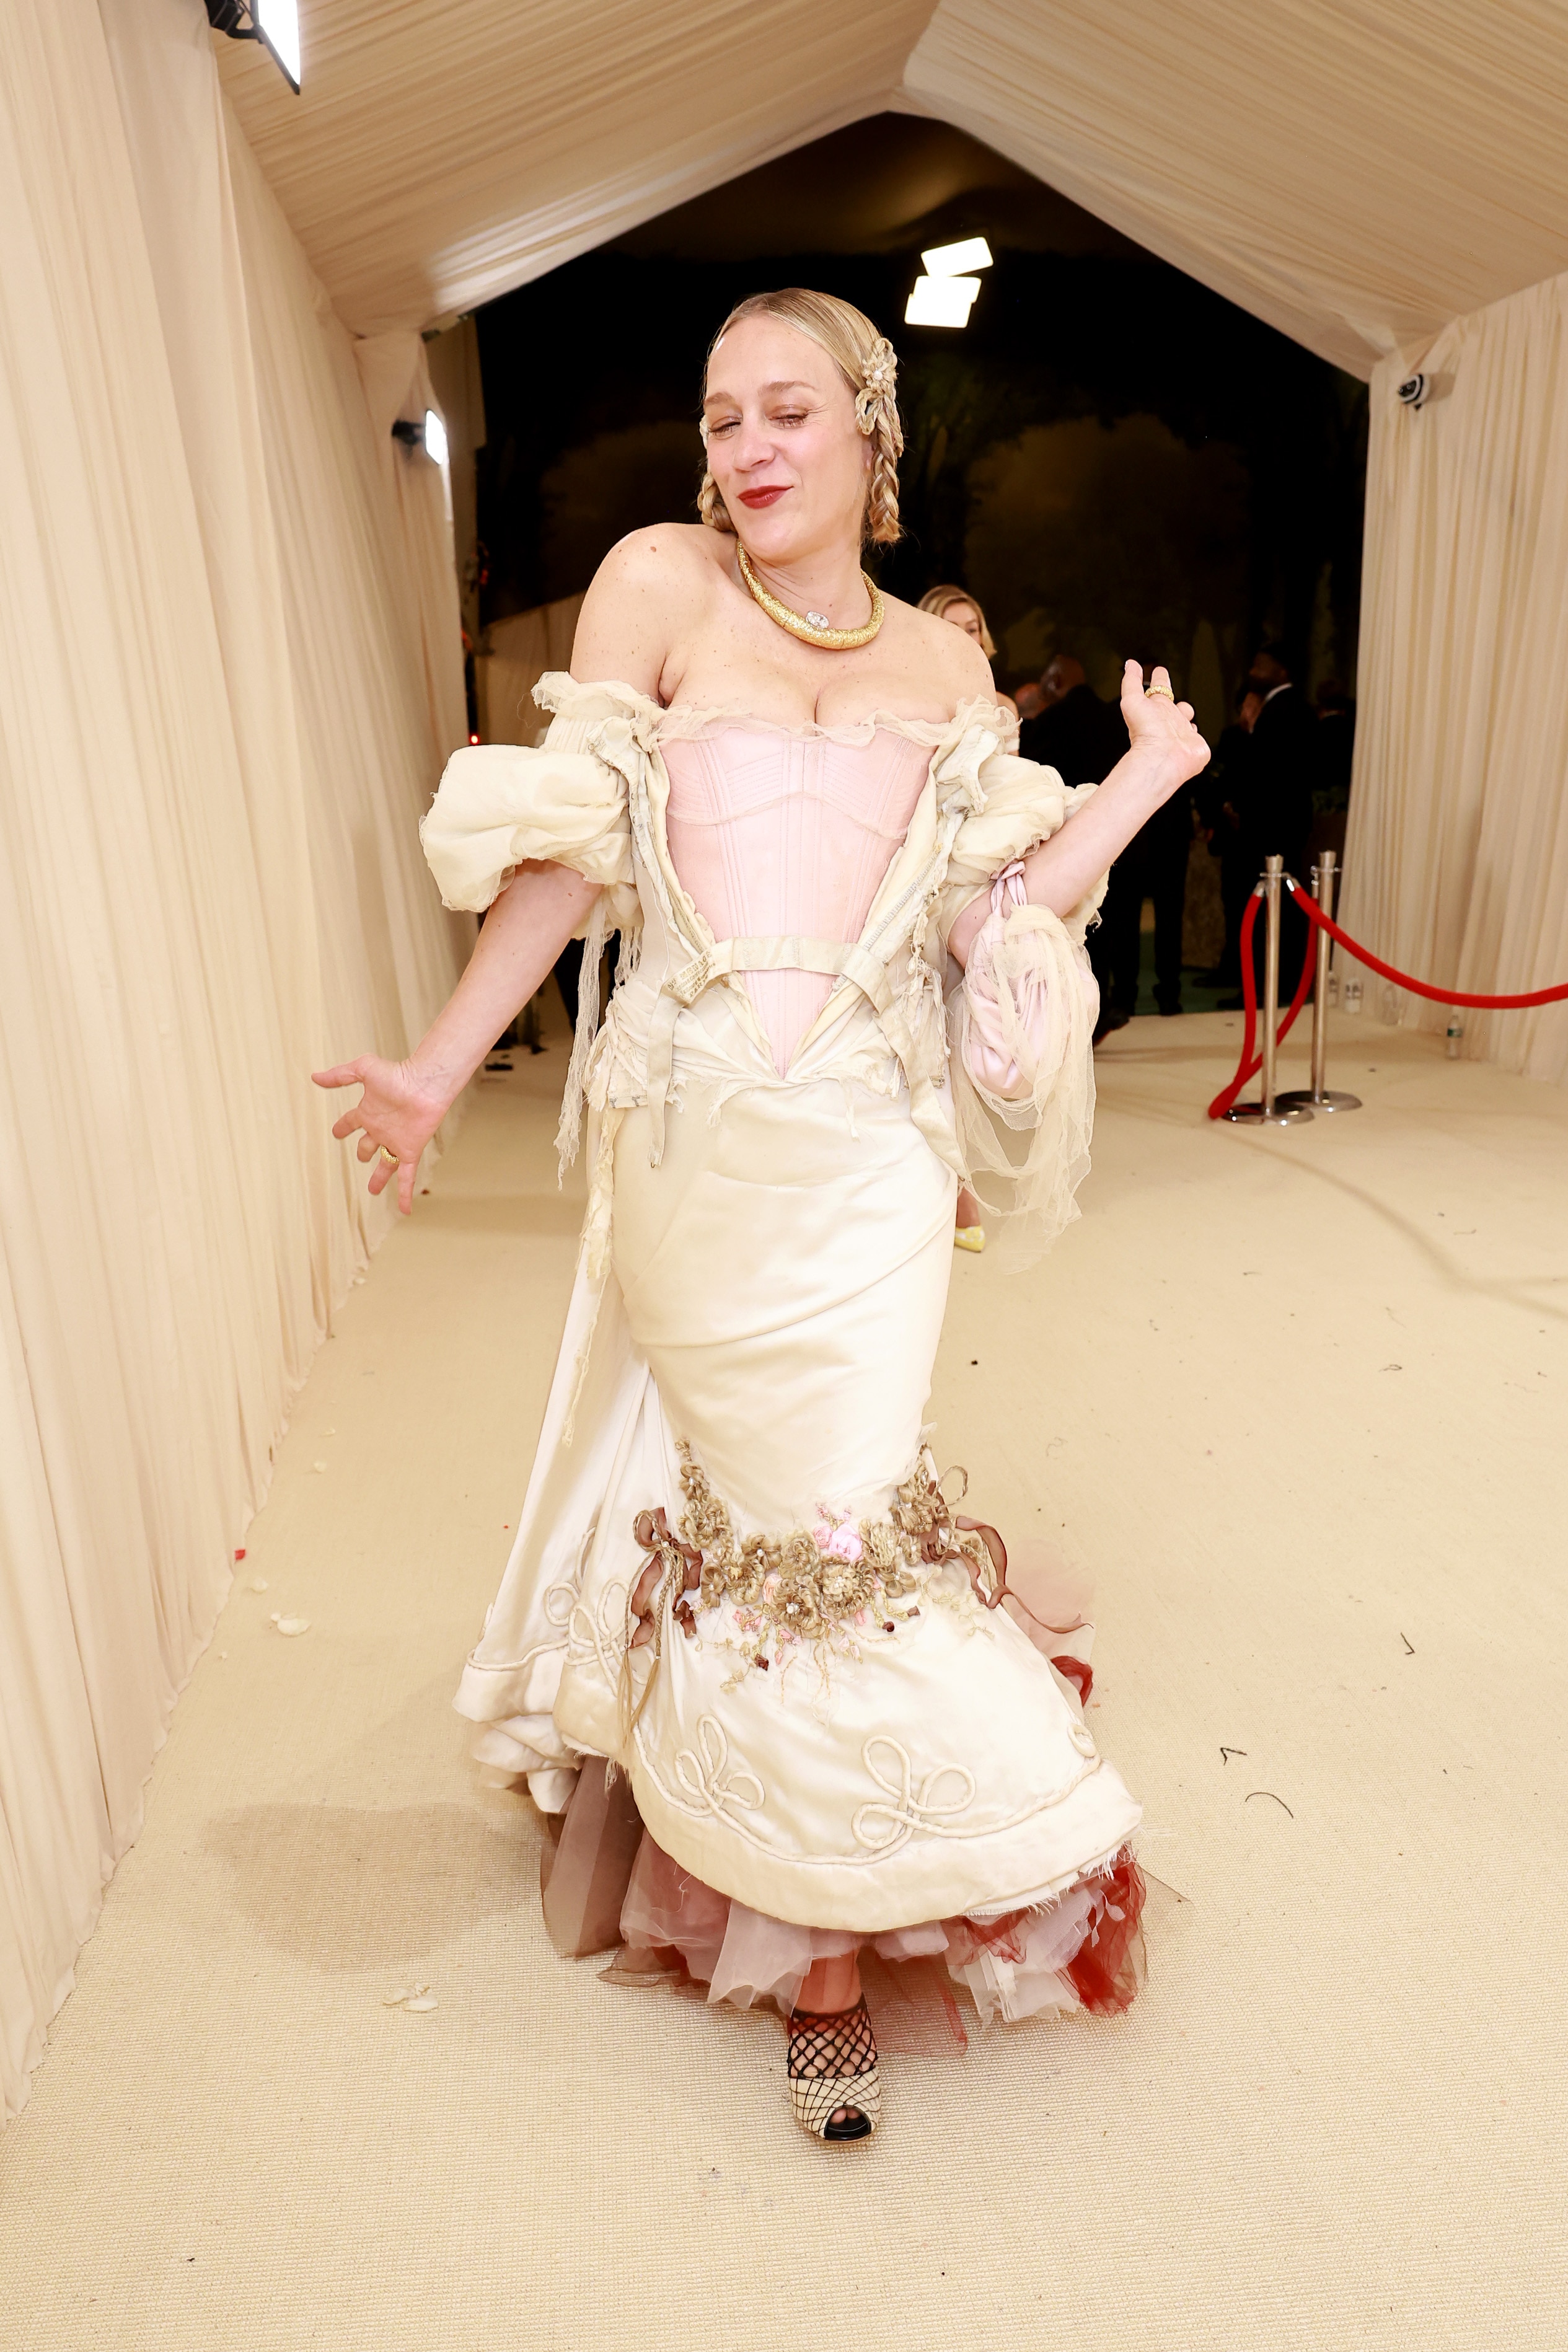 Chloe Sevigny wearing a white and cream gown smiles and poses for the camera